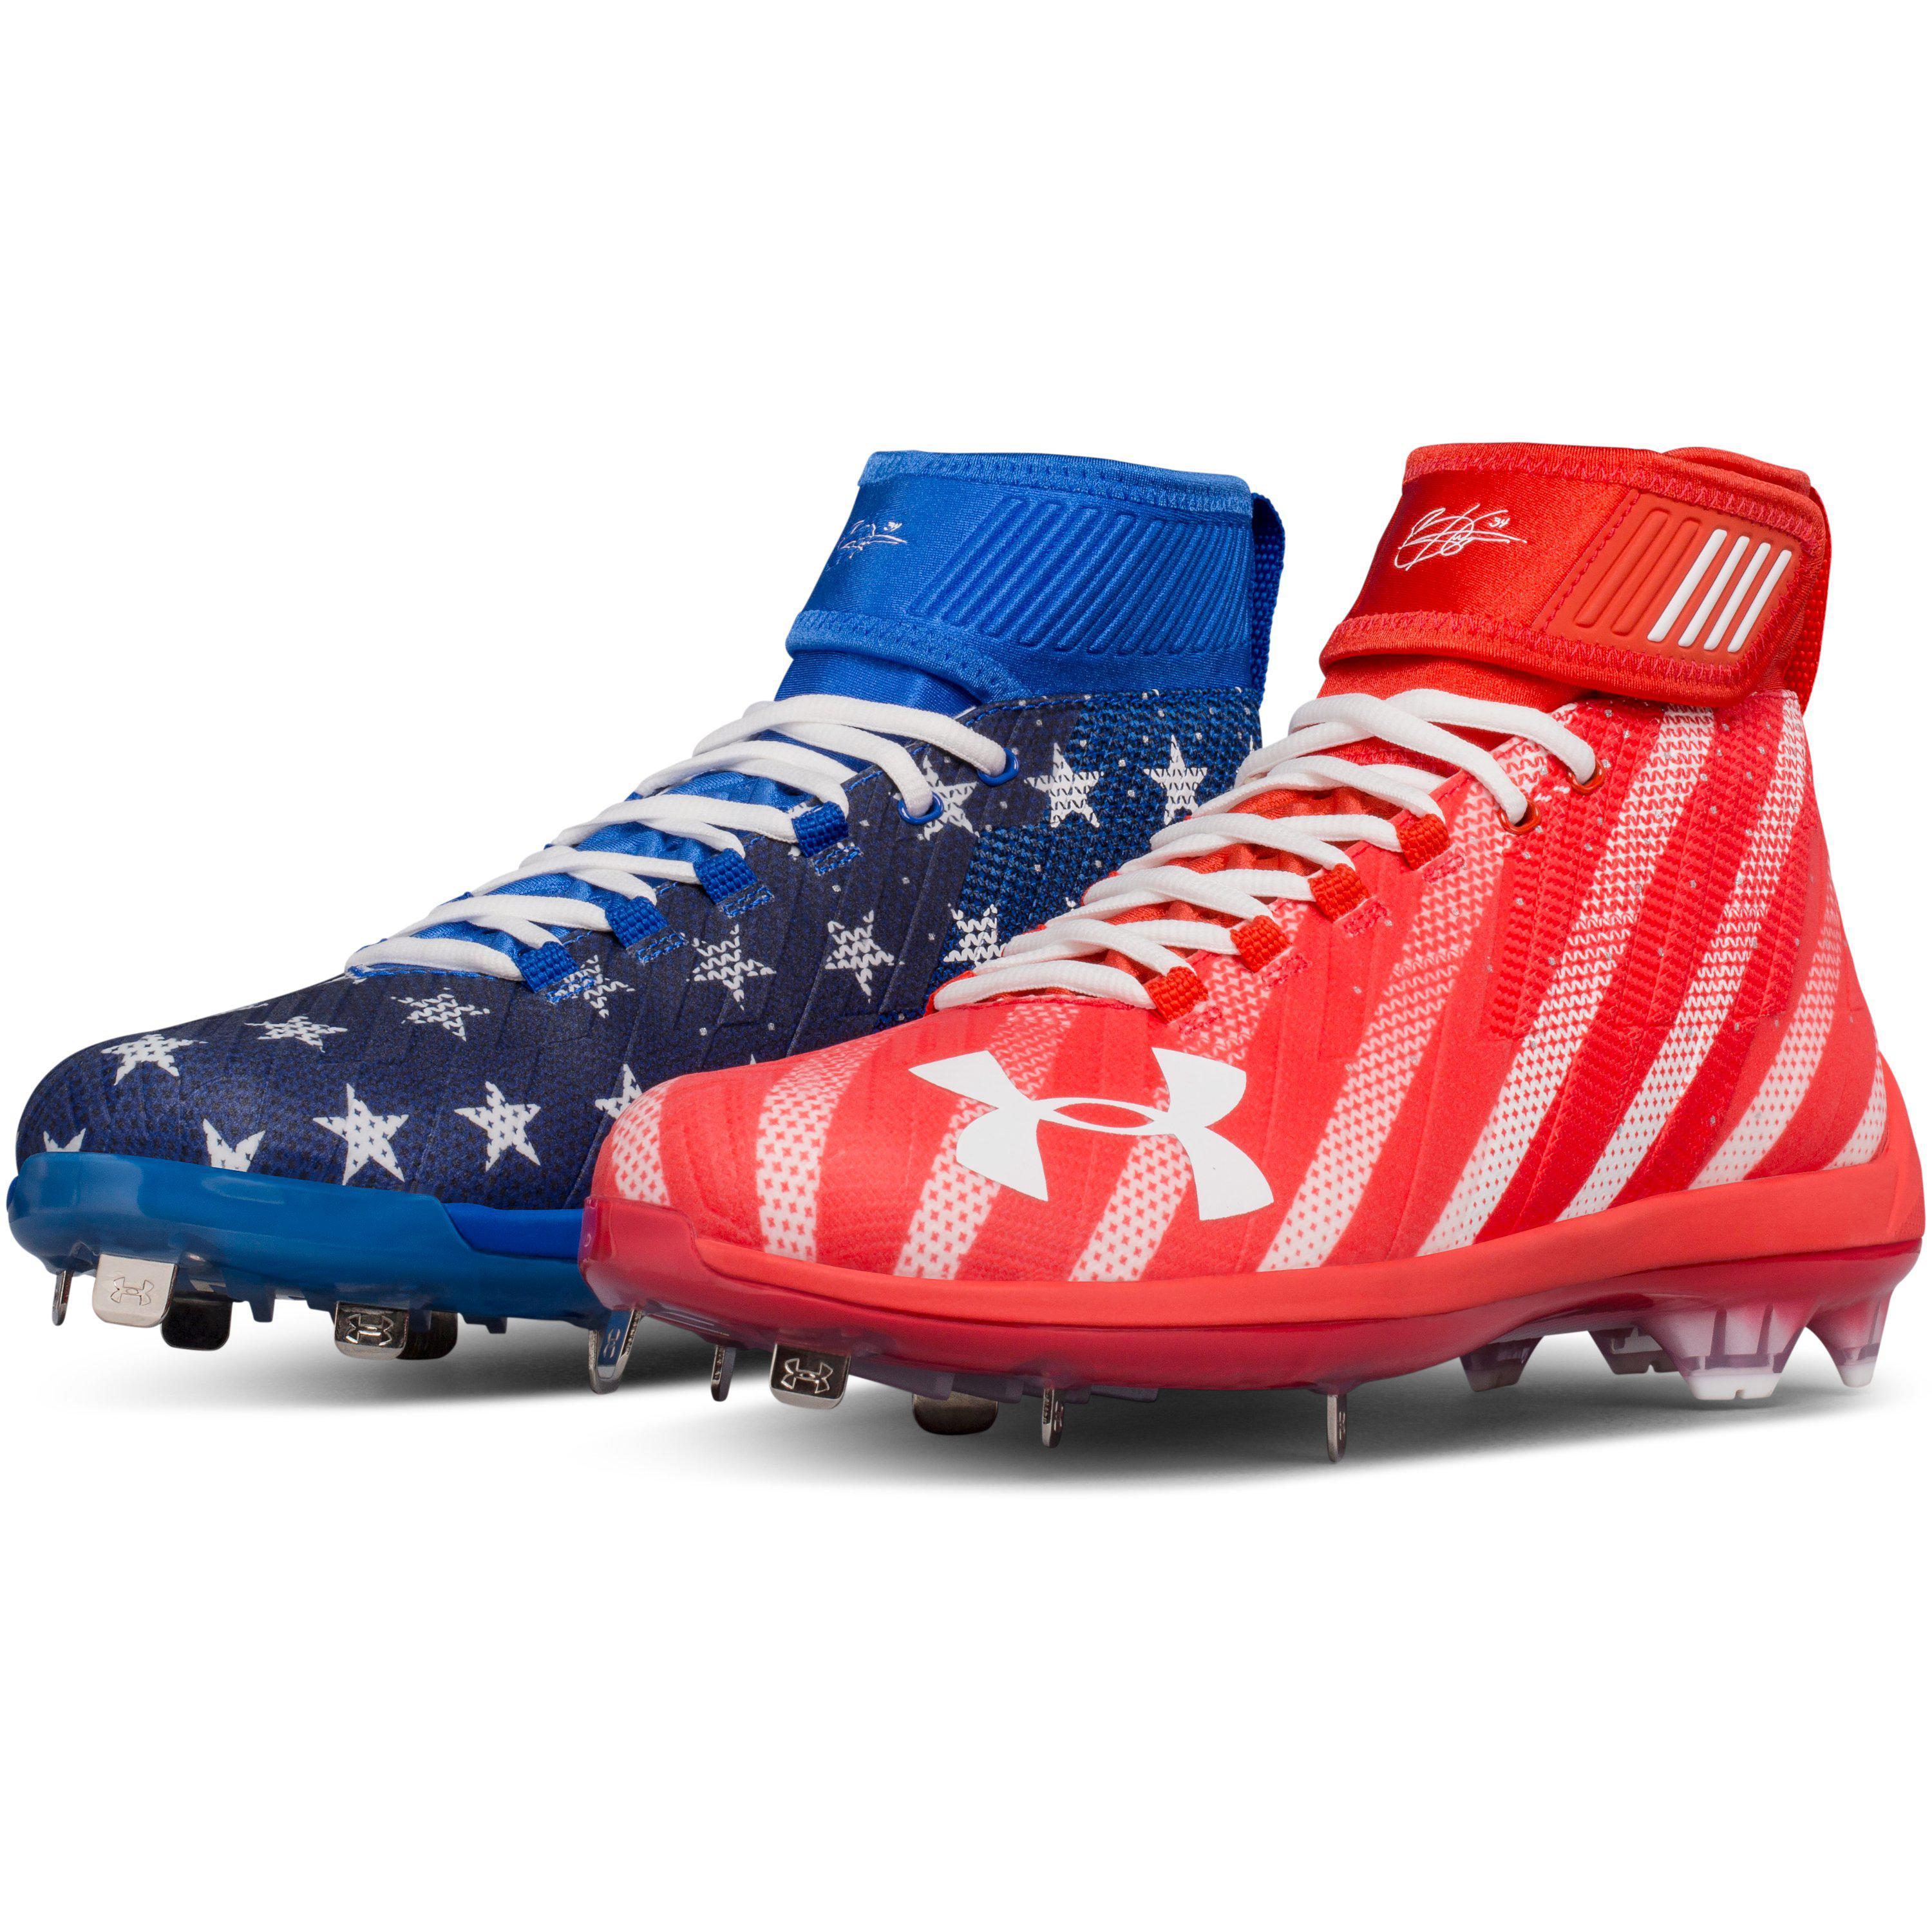 New Balance Baseball Cleats Red White And Blue / New Balance - Red/White Junior Low Rubber 